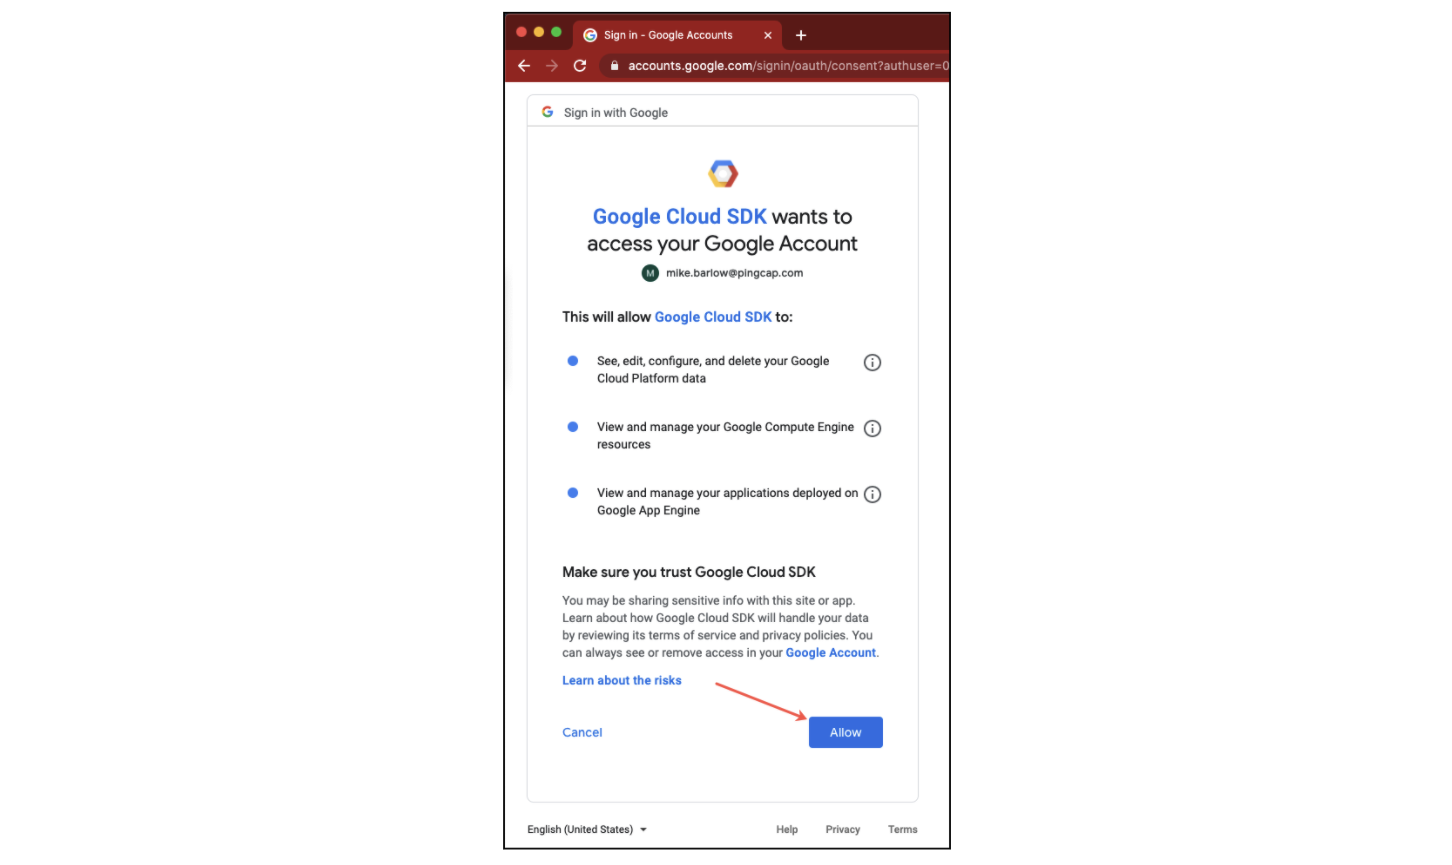 Google Cloud SDK wants to access your account